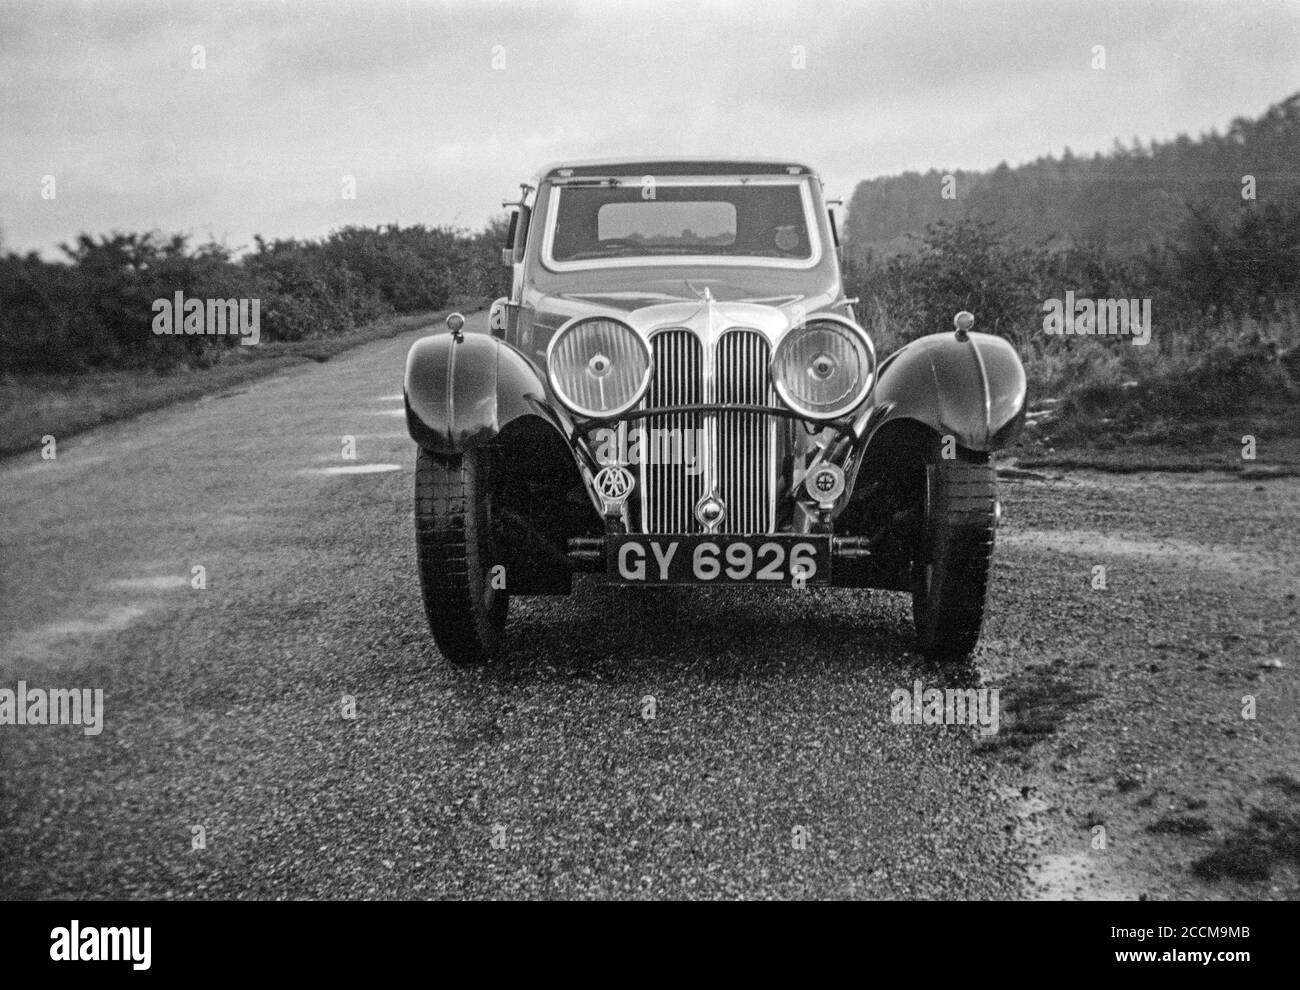 Vintage 1930s black and white photograph of a British Jaguar SS I Coupe Sports car. Registration number GY 6926. Stock Photo